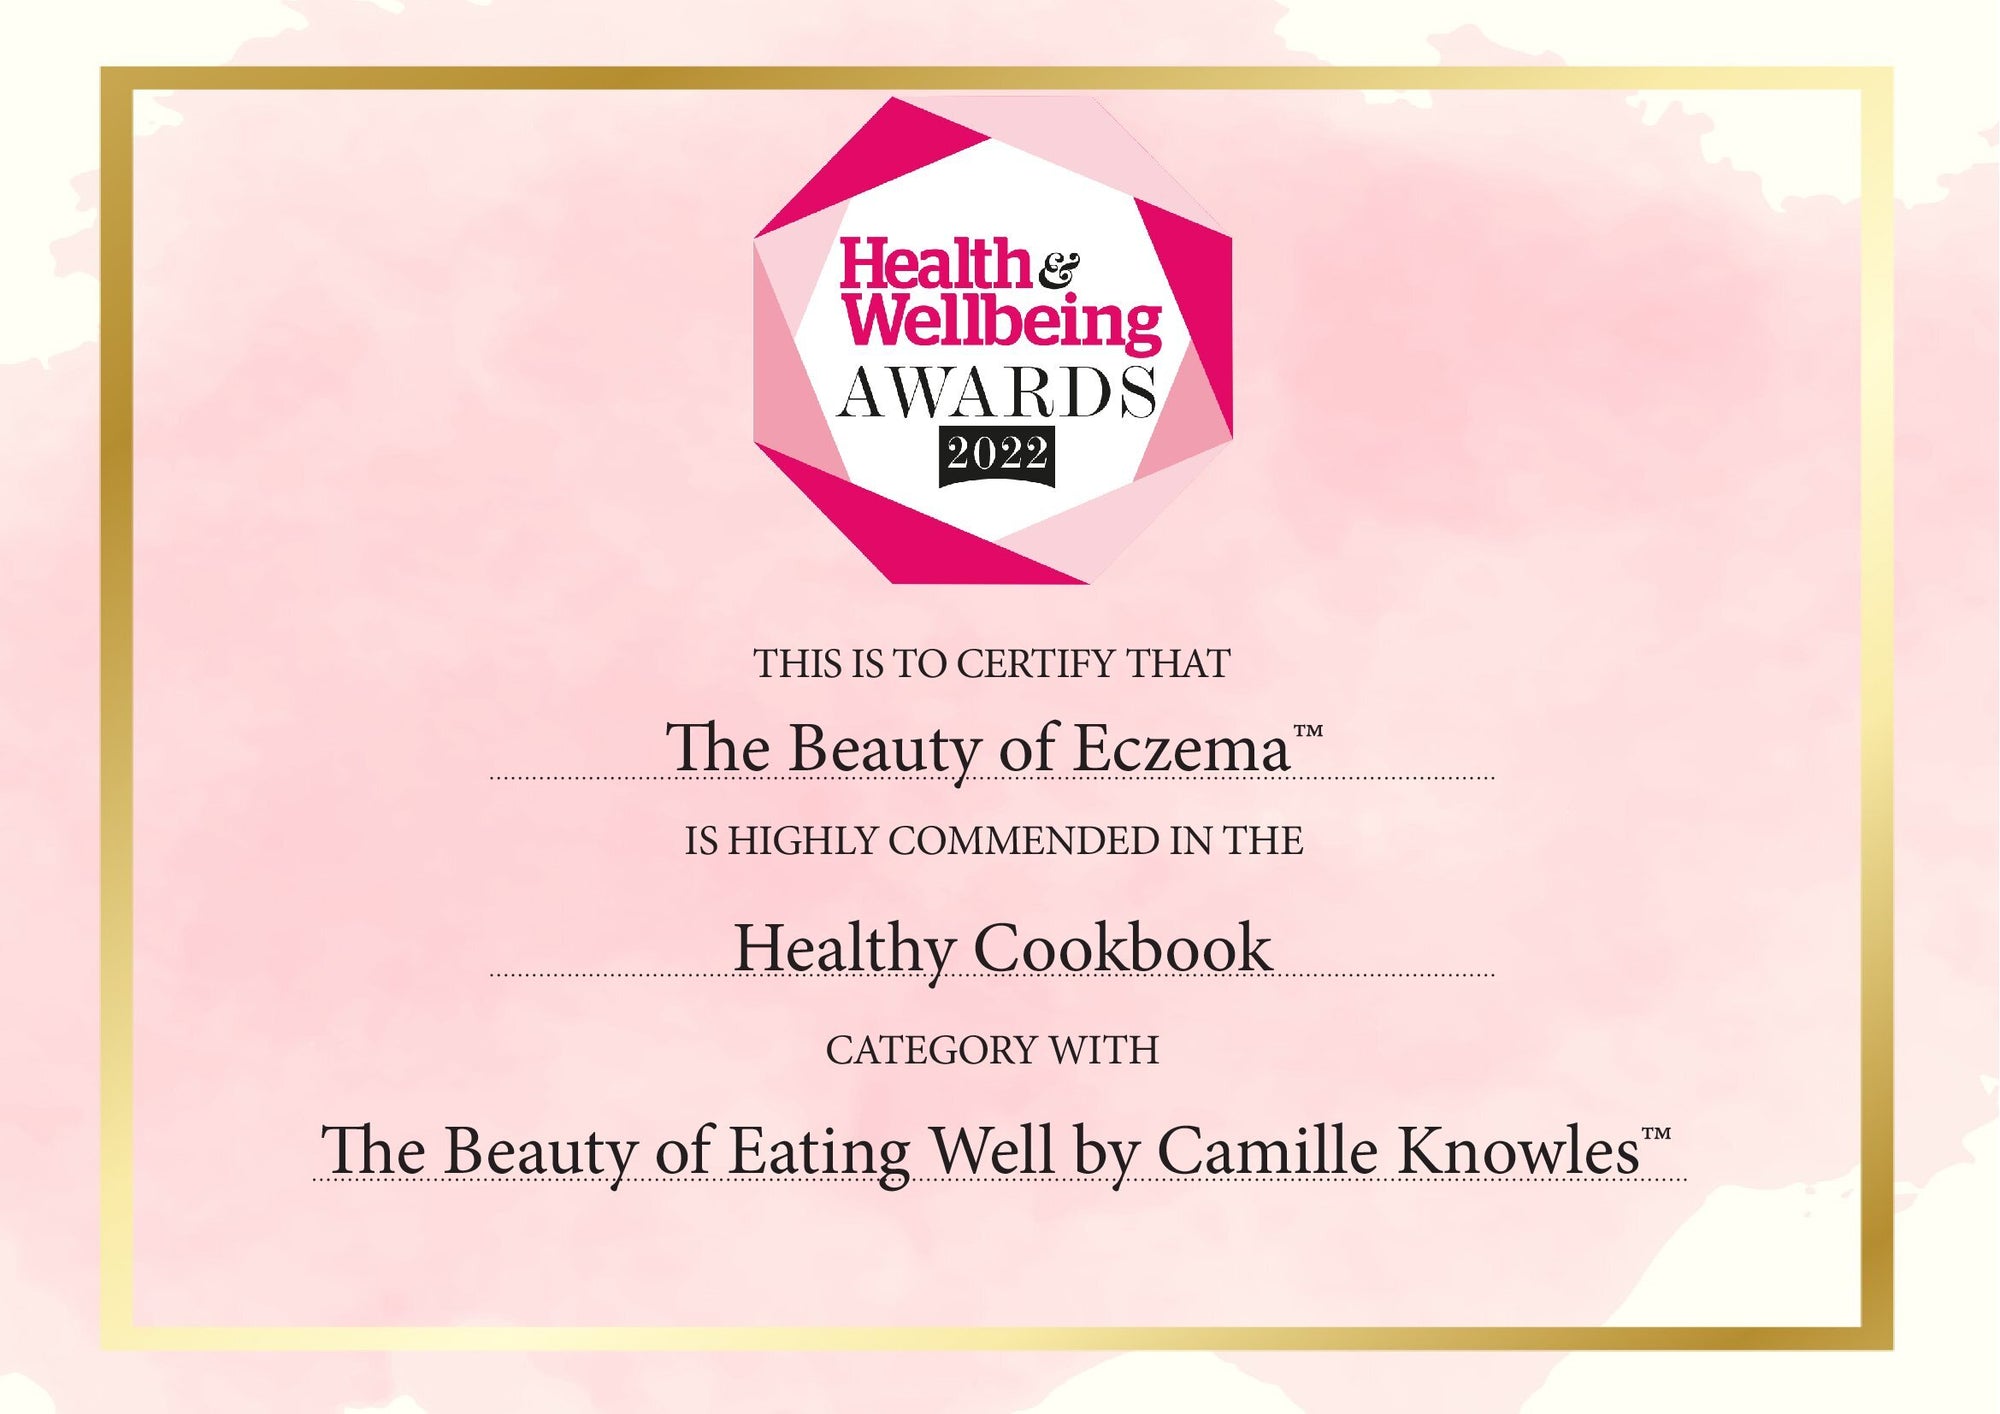 The Beauty of Eating Well by Camille Knowles™ Cookbook. Please order on Amazon 💕